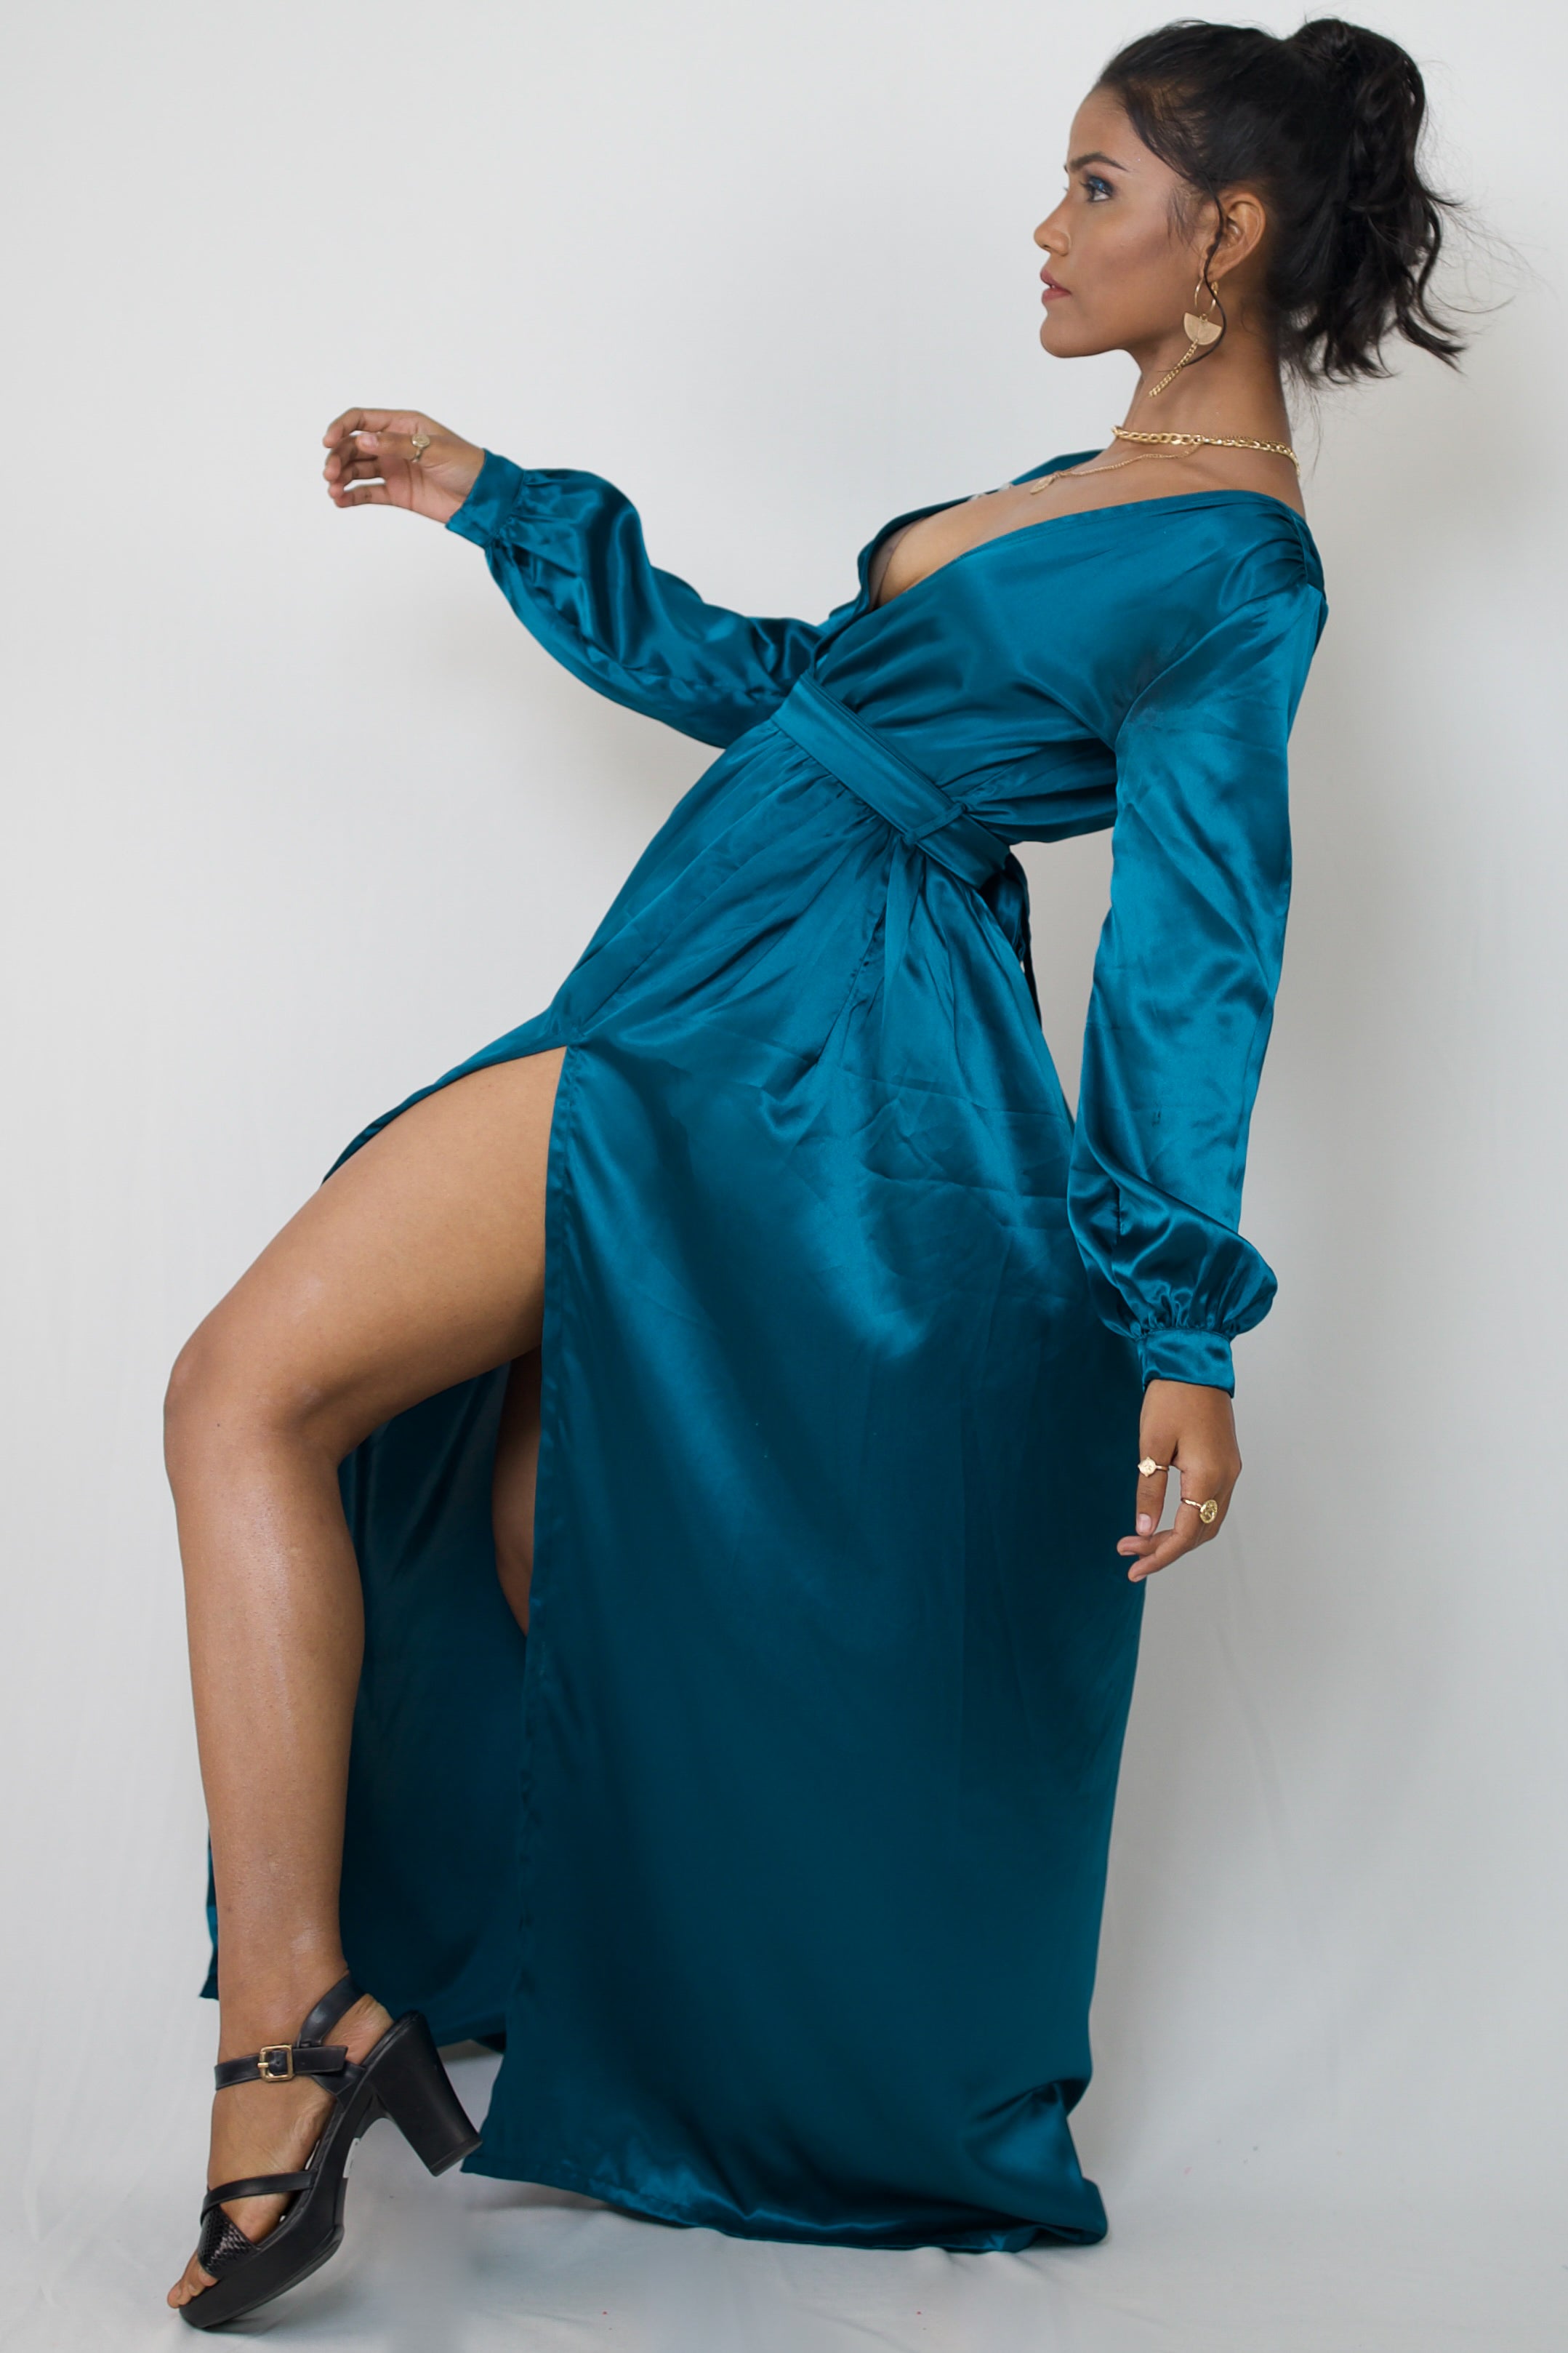 April, full length satin gown with split navy - Ladida Boutique